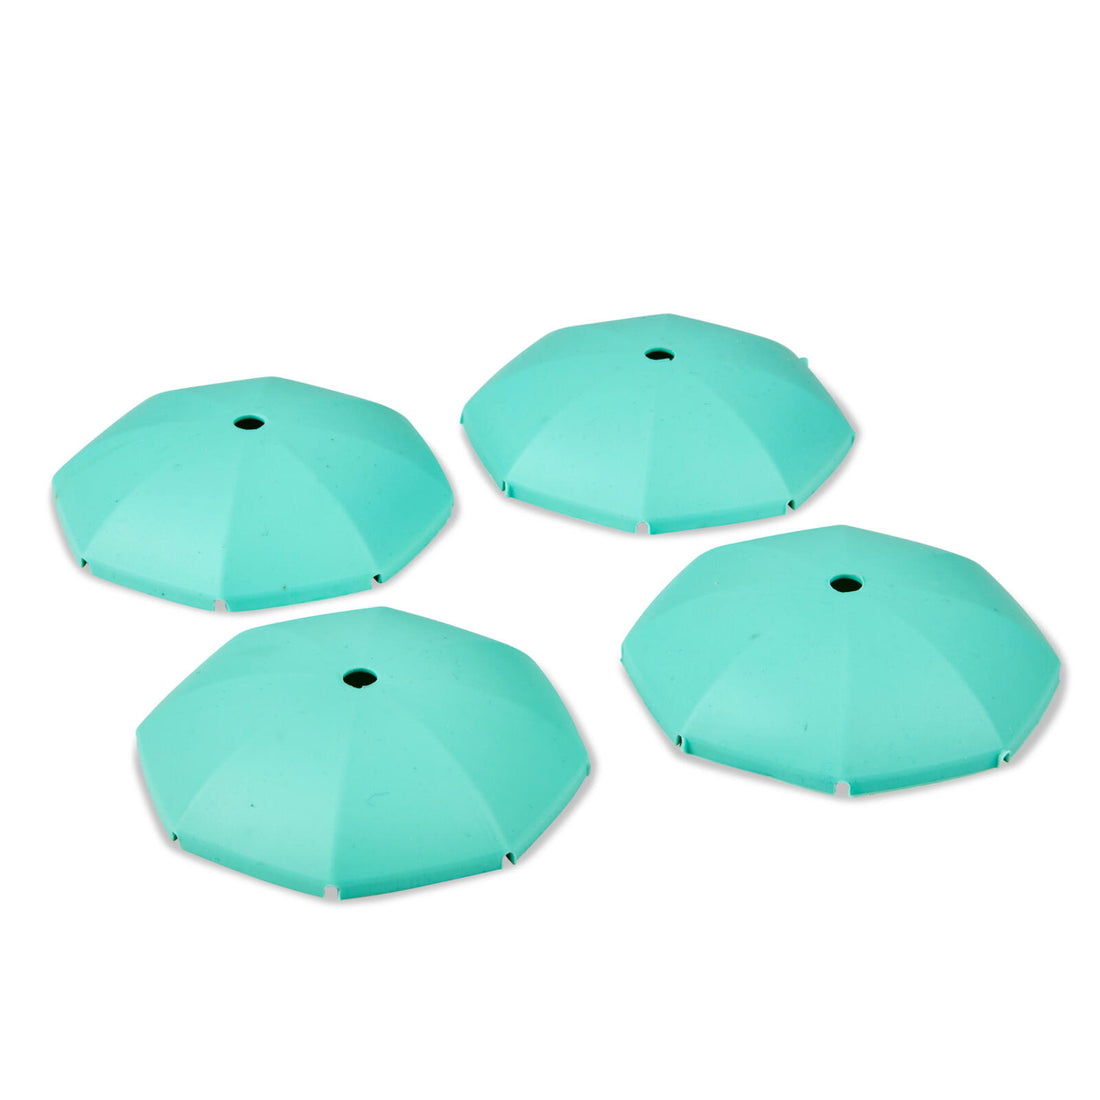 REFRESH Cup Covers set of 4 blue